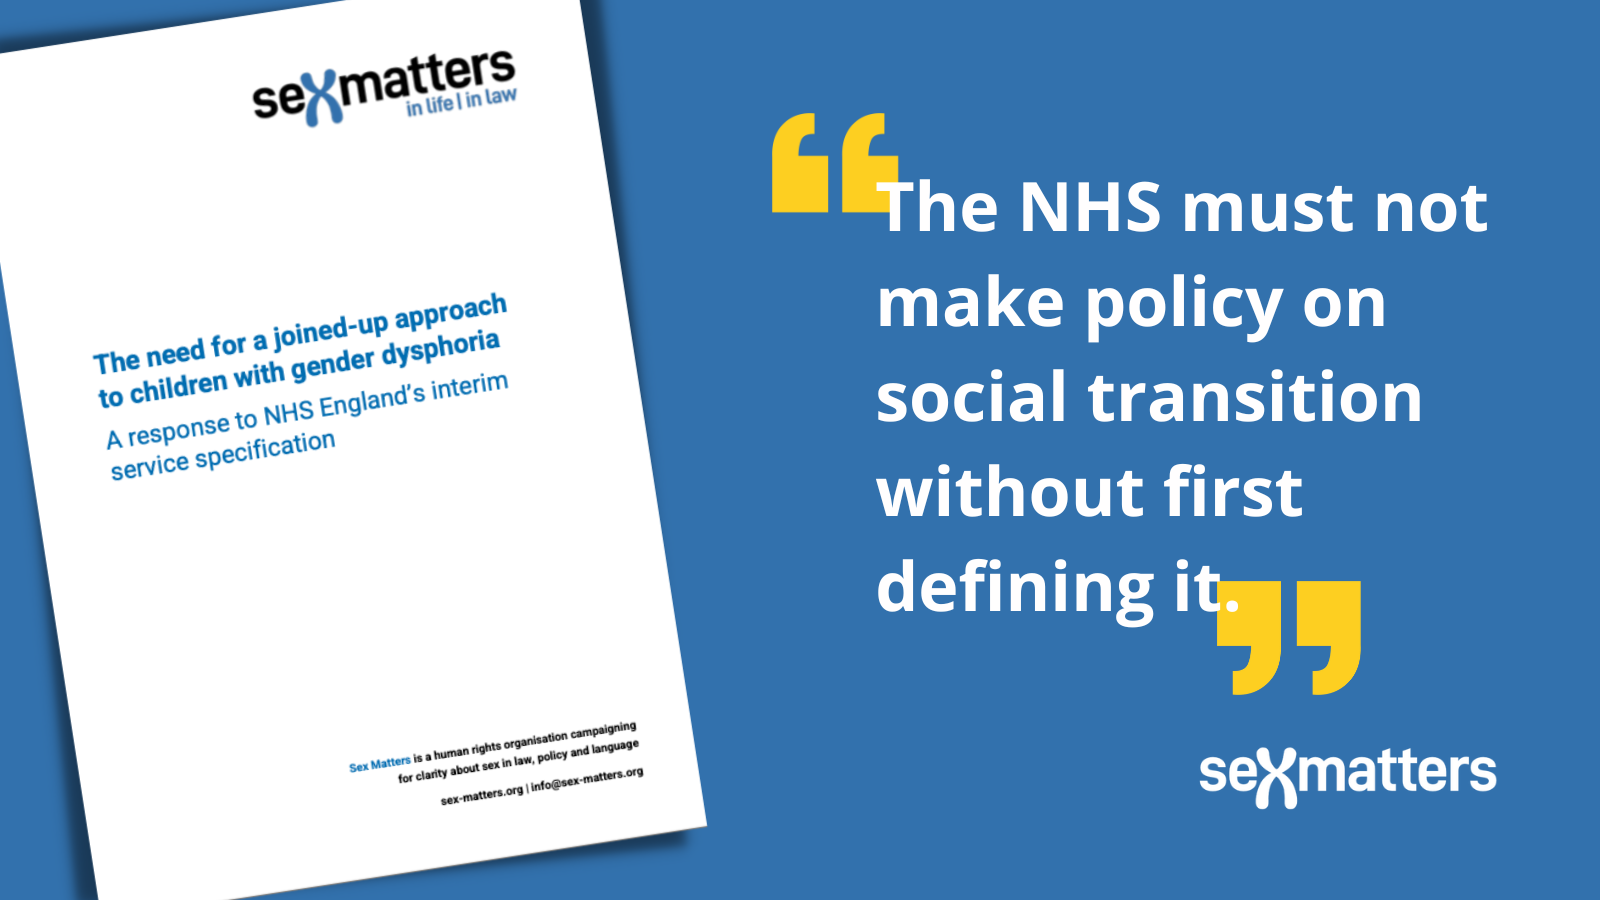 "The NHS must not make policy on social transition without first defining it."